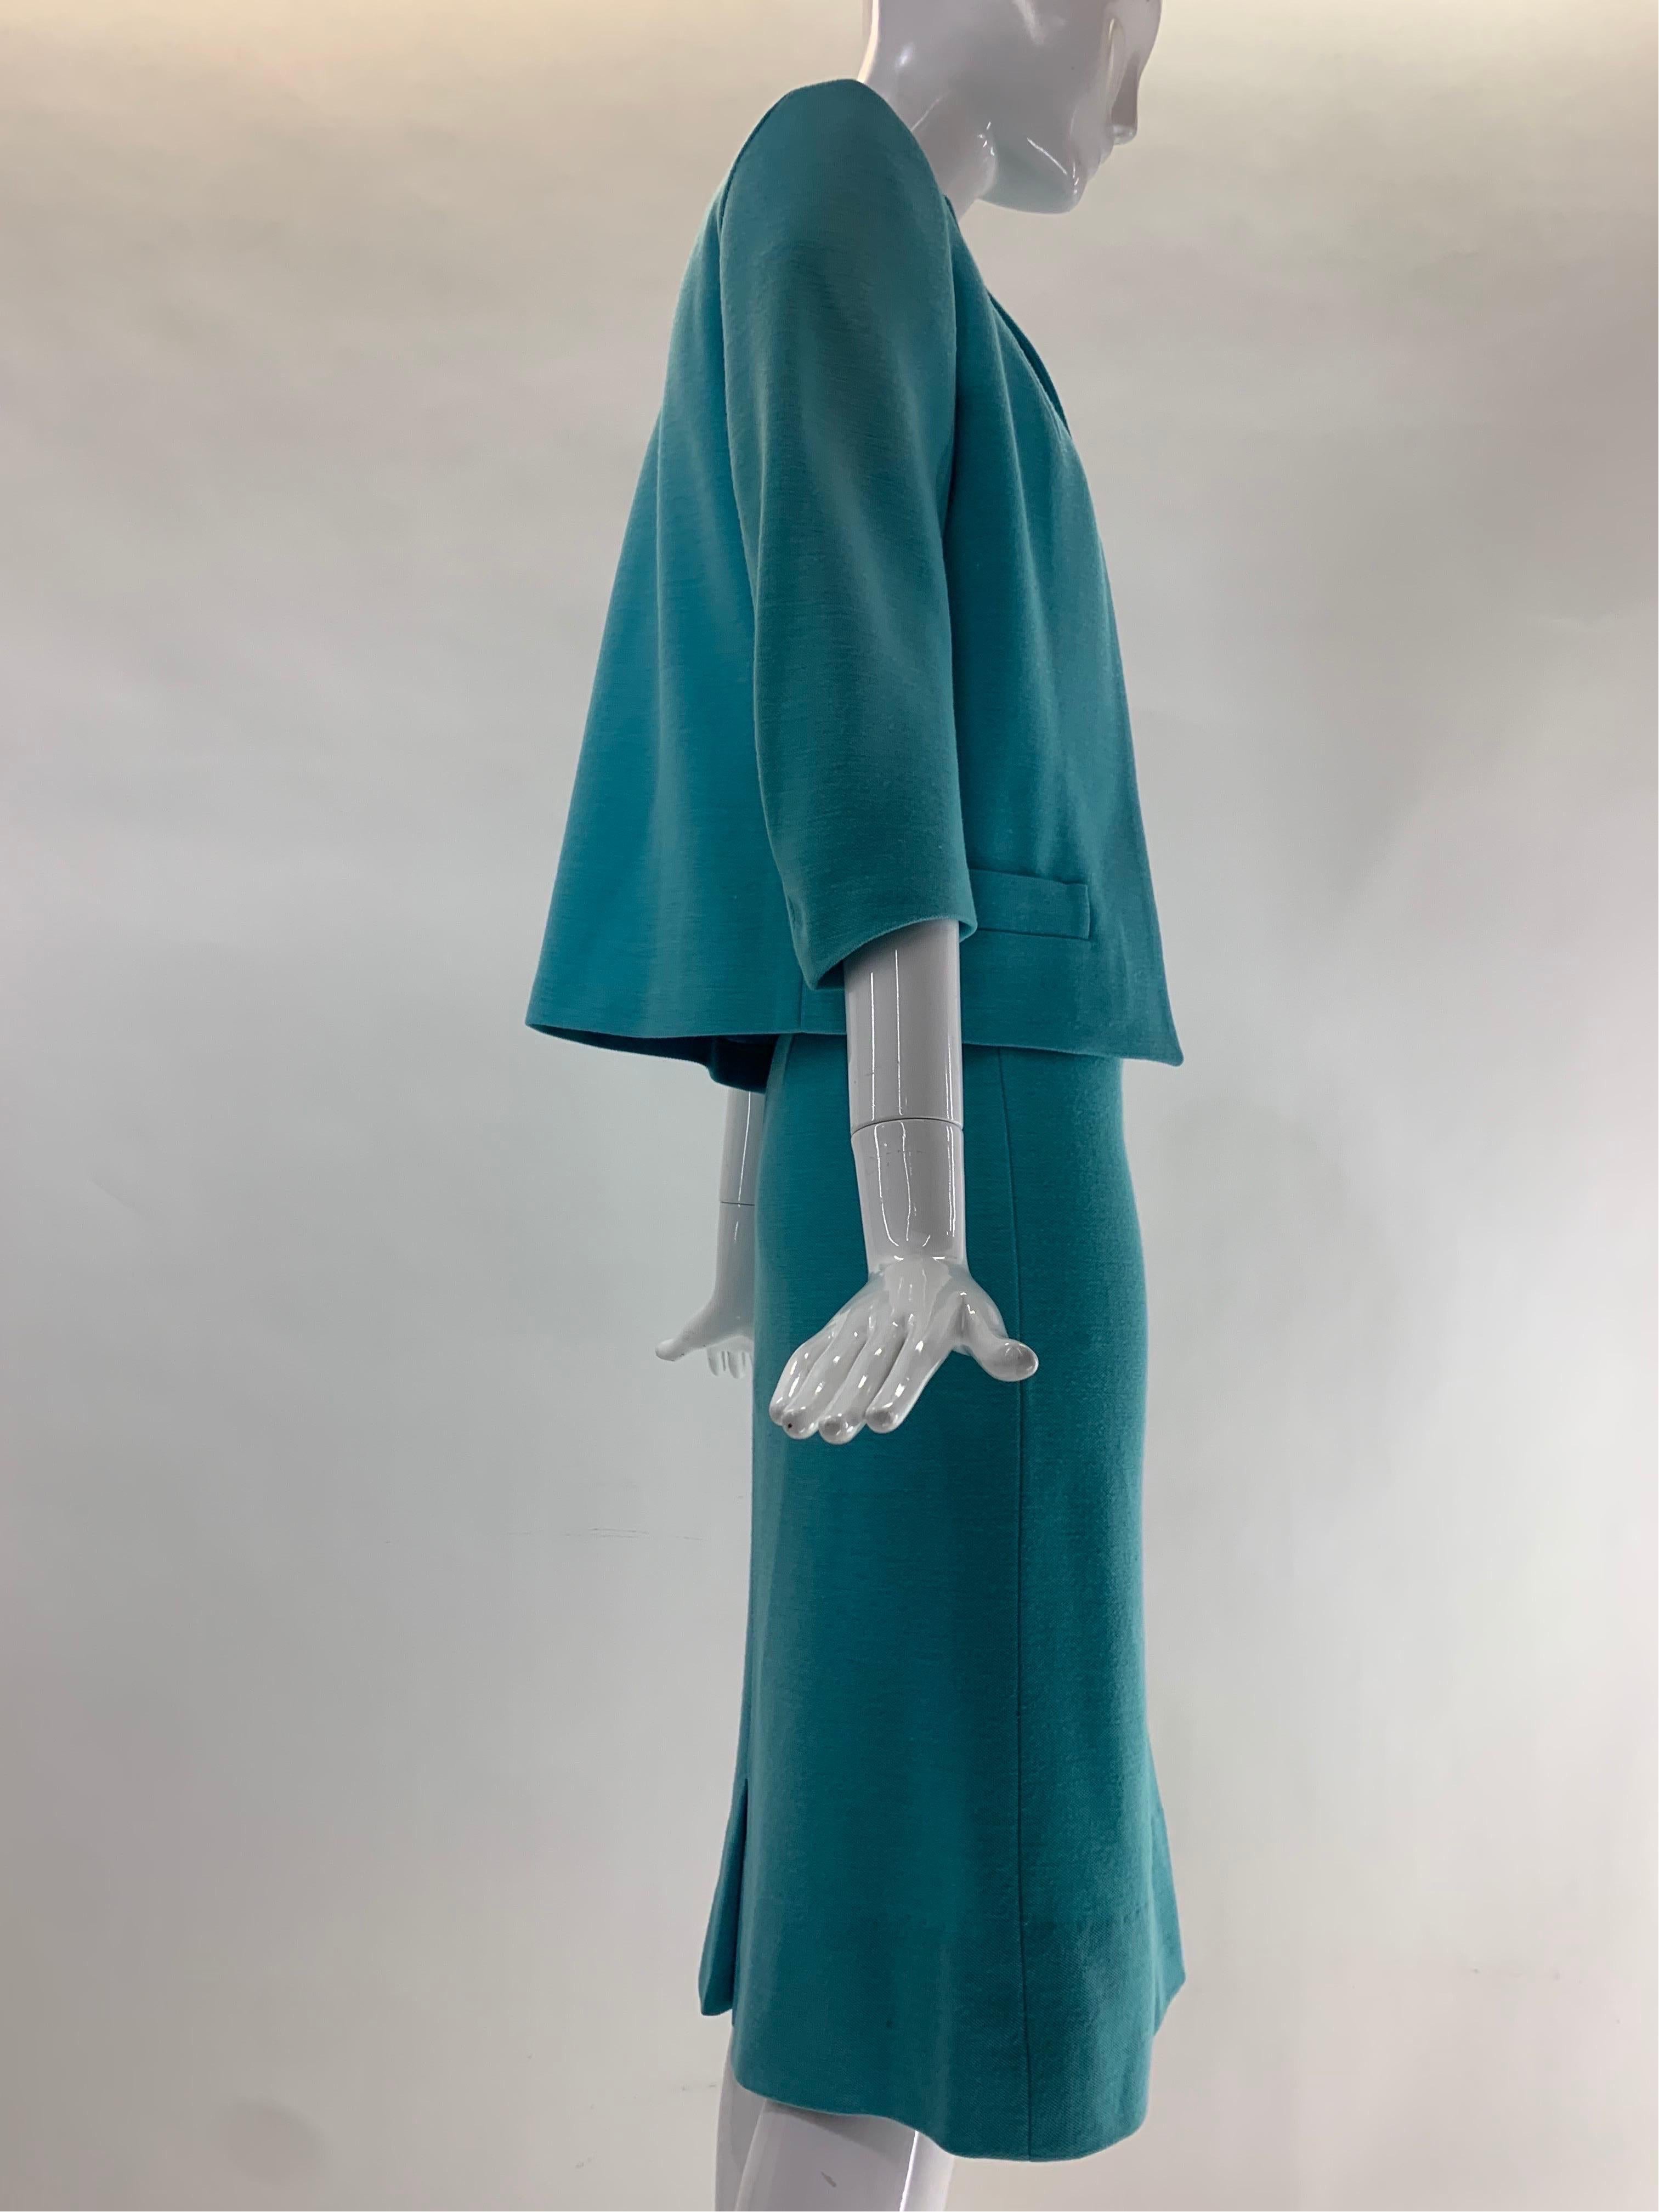 Blue 1960 Promenade - Holland Turquoise Wool Double-Knit 3-Piece Skirt Suit  For Sale